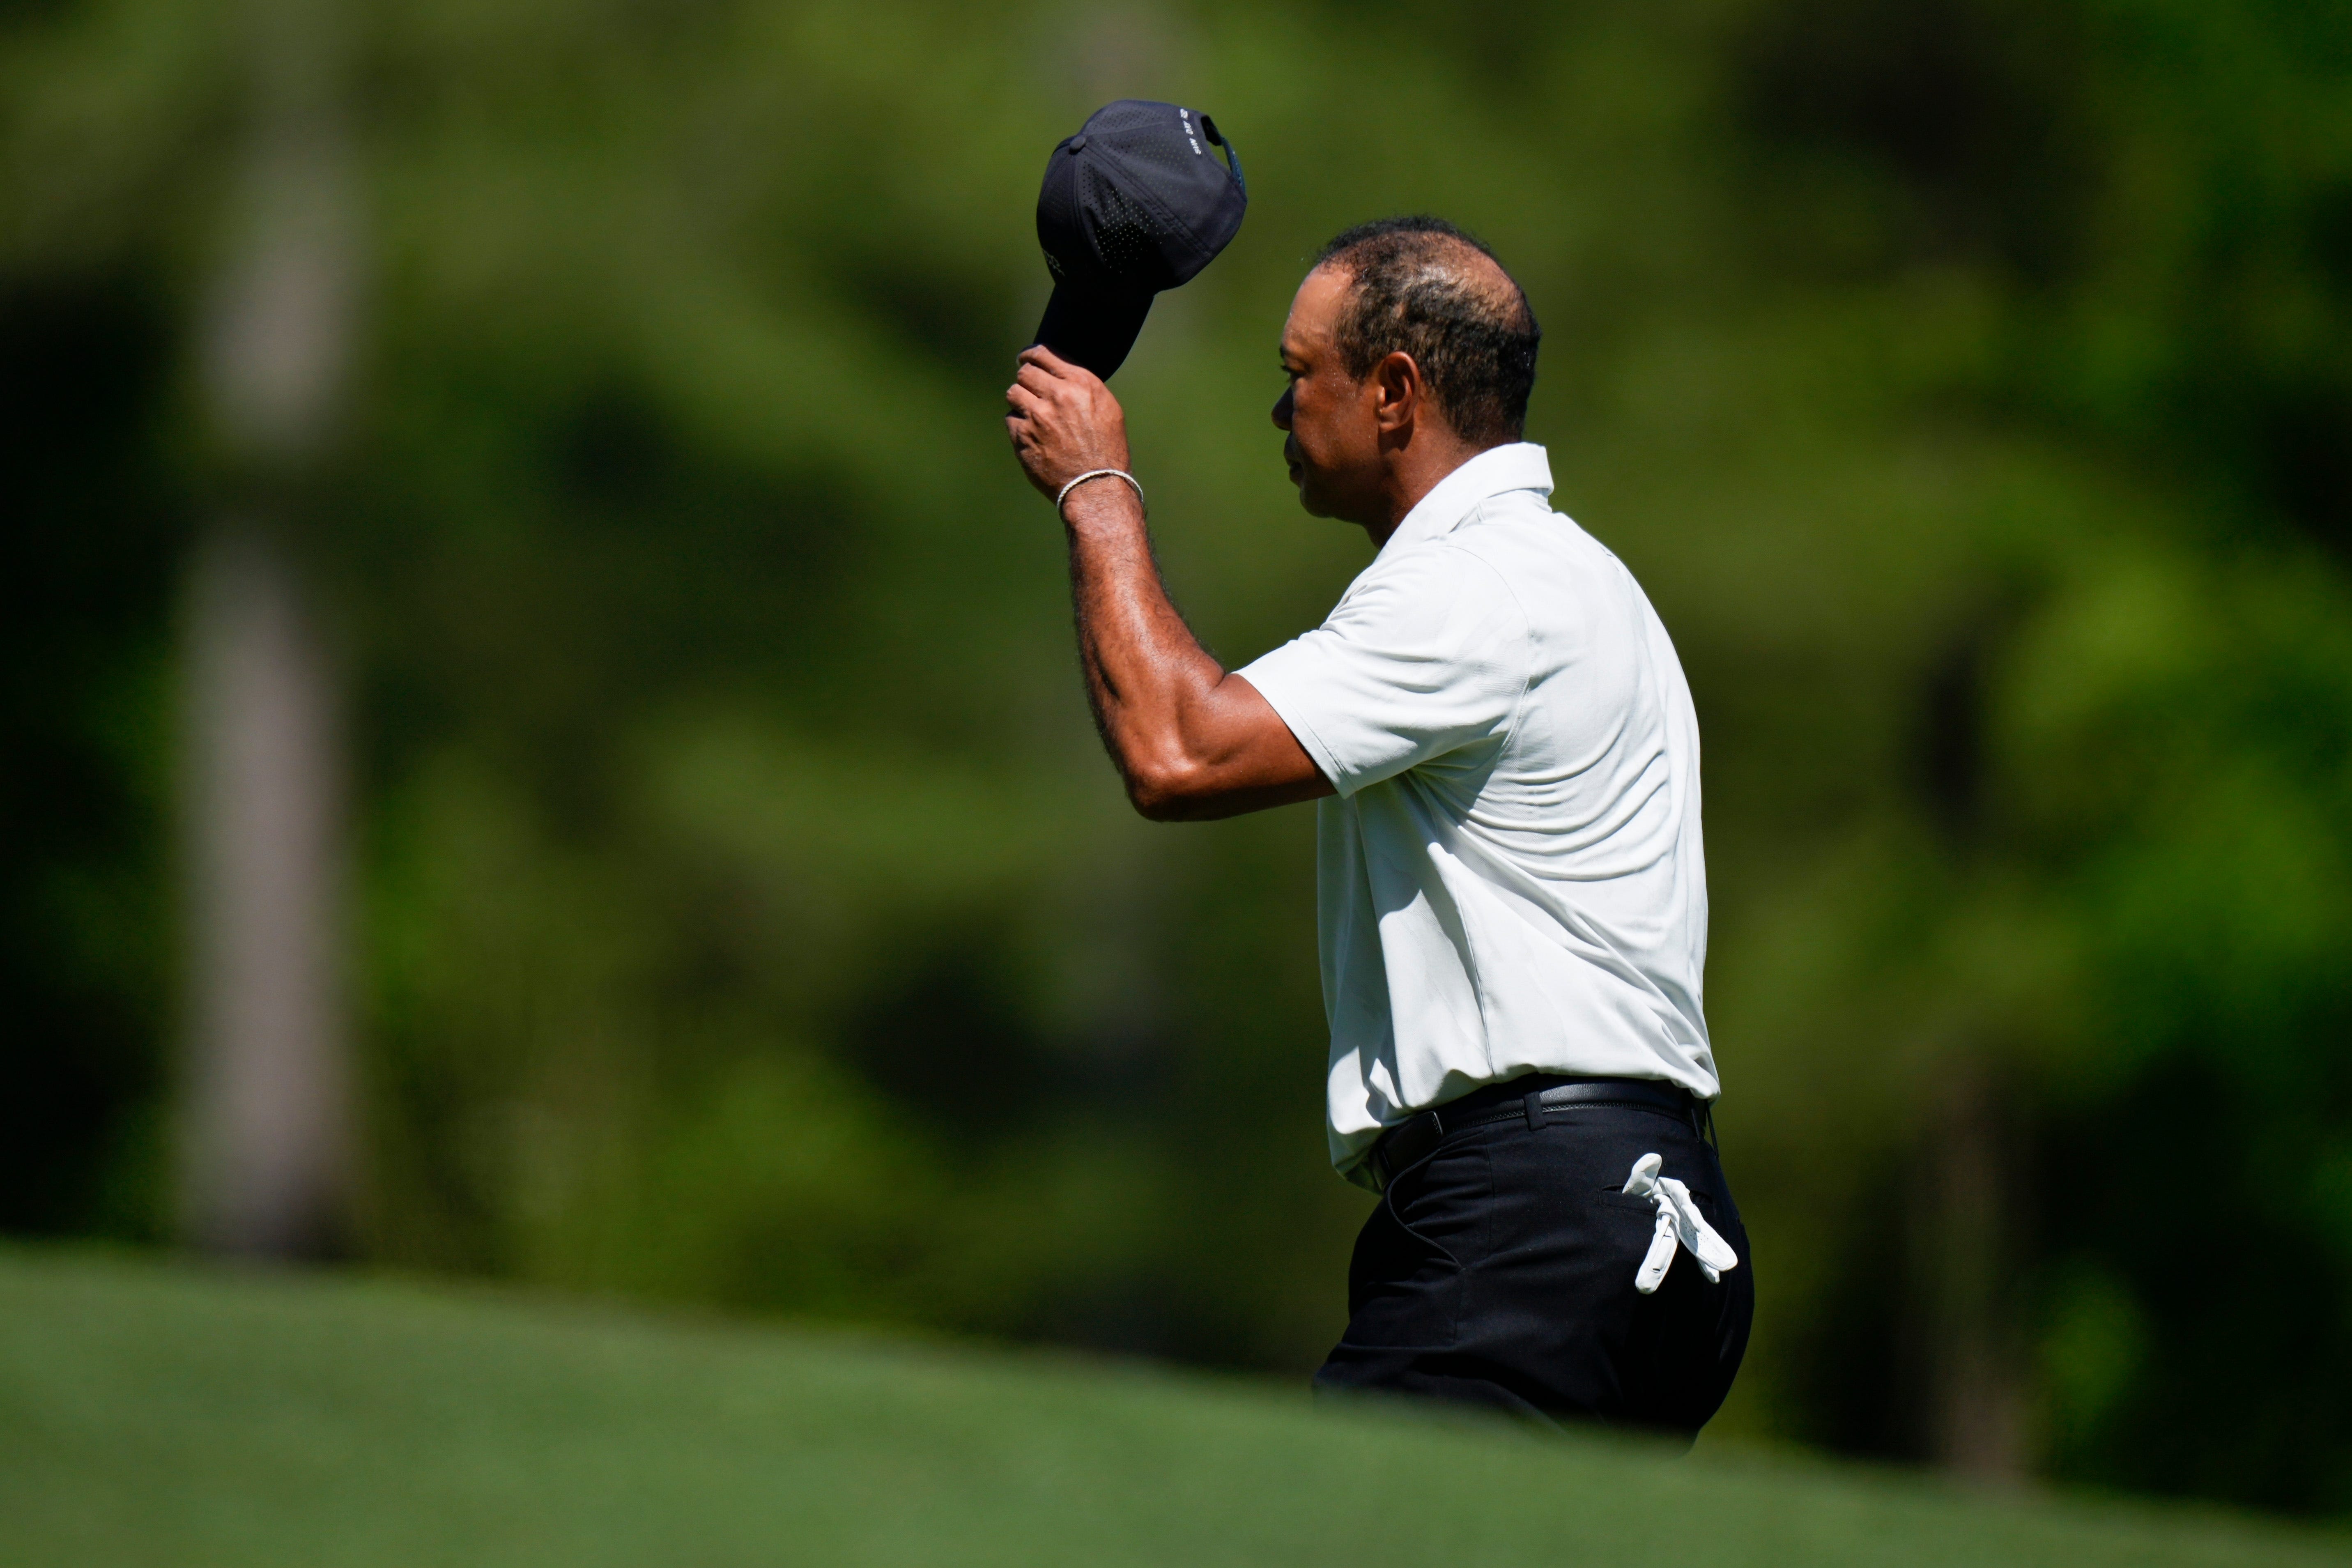 Tiger Woods endured a difficult day